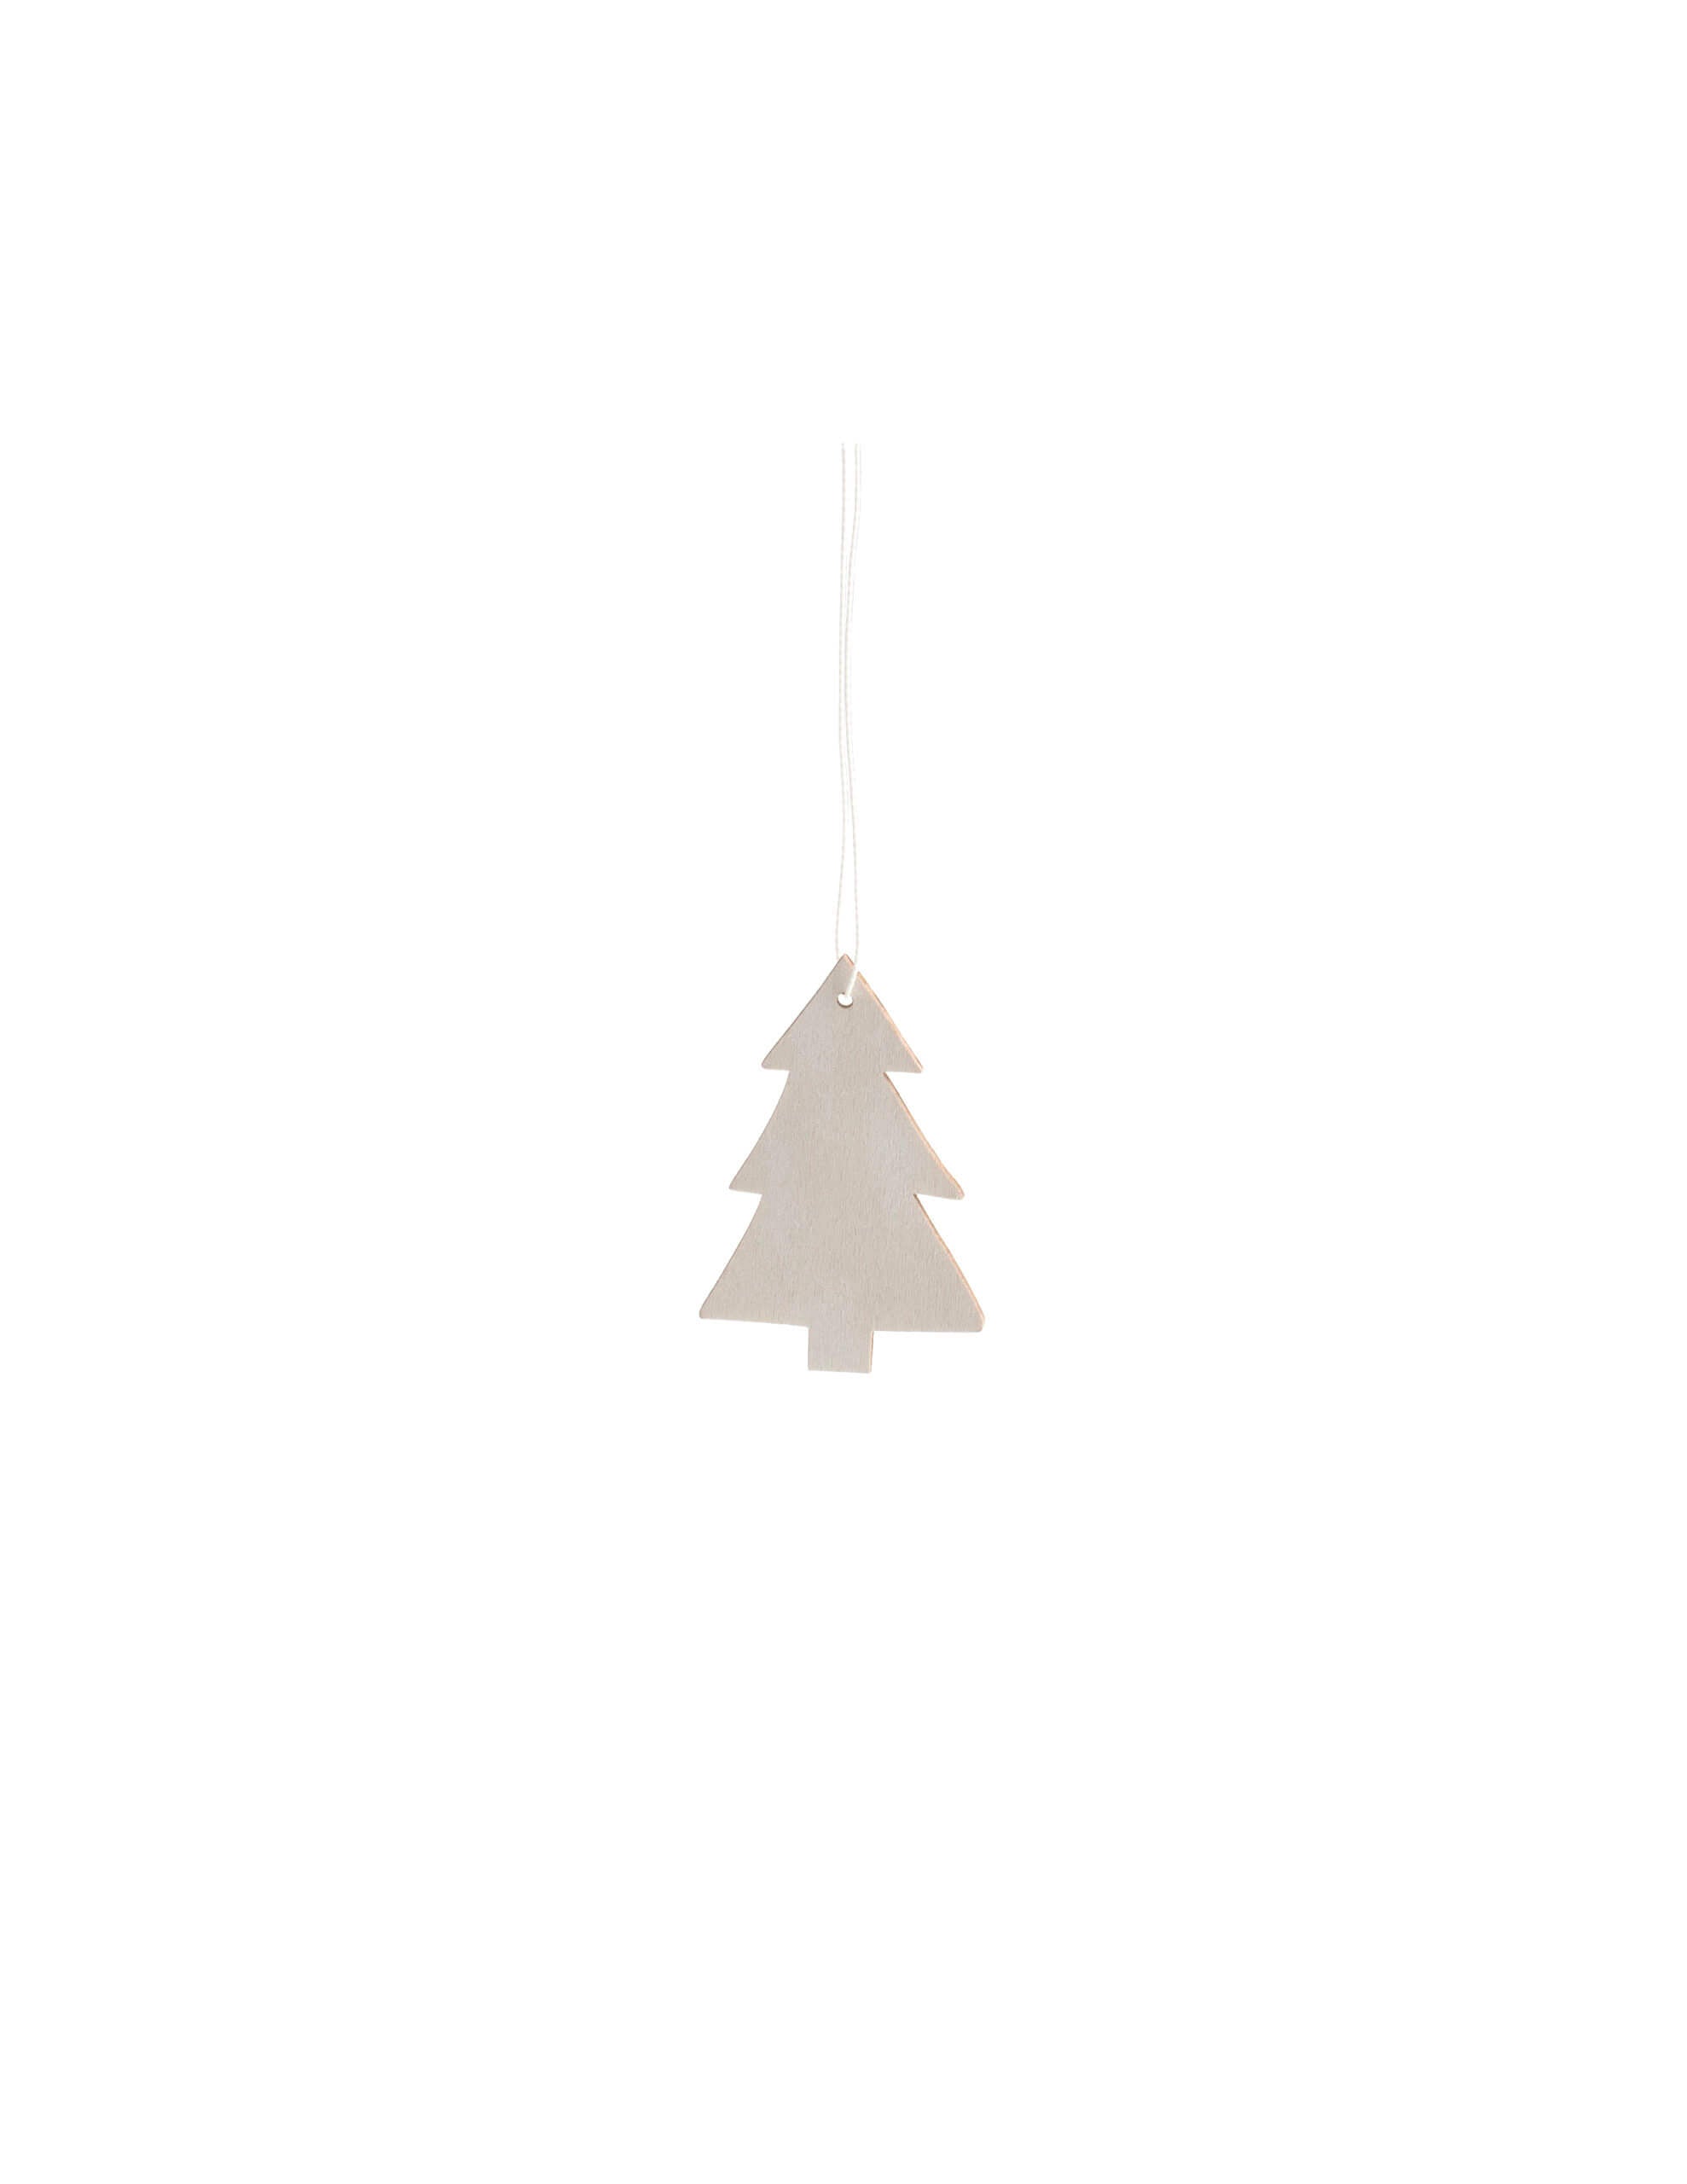 Mulseryd Tree Decoration | White or Brown | by Storefactory - Lifestory